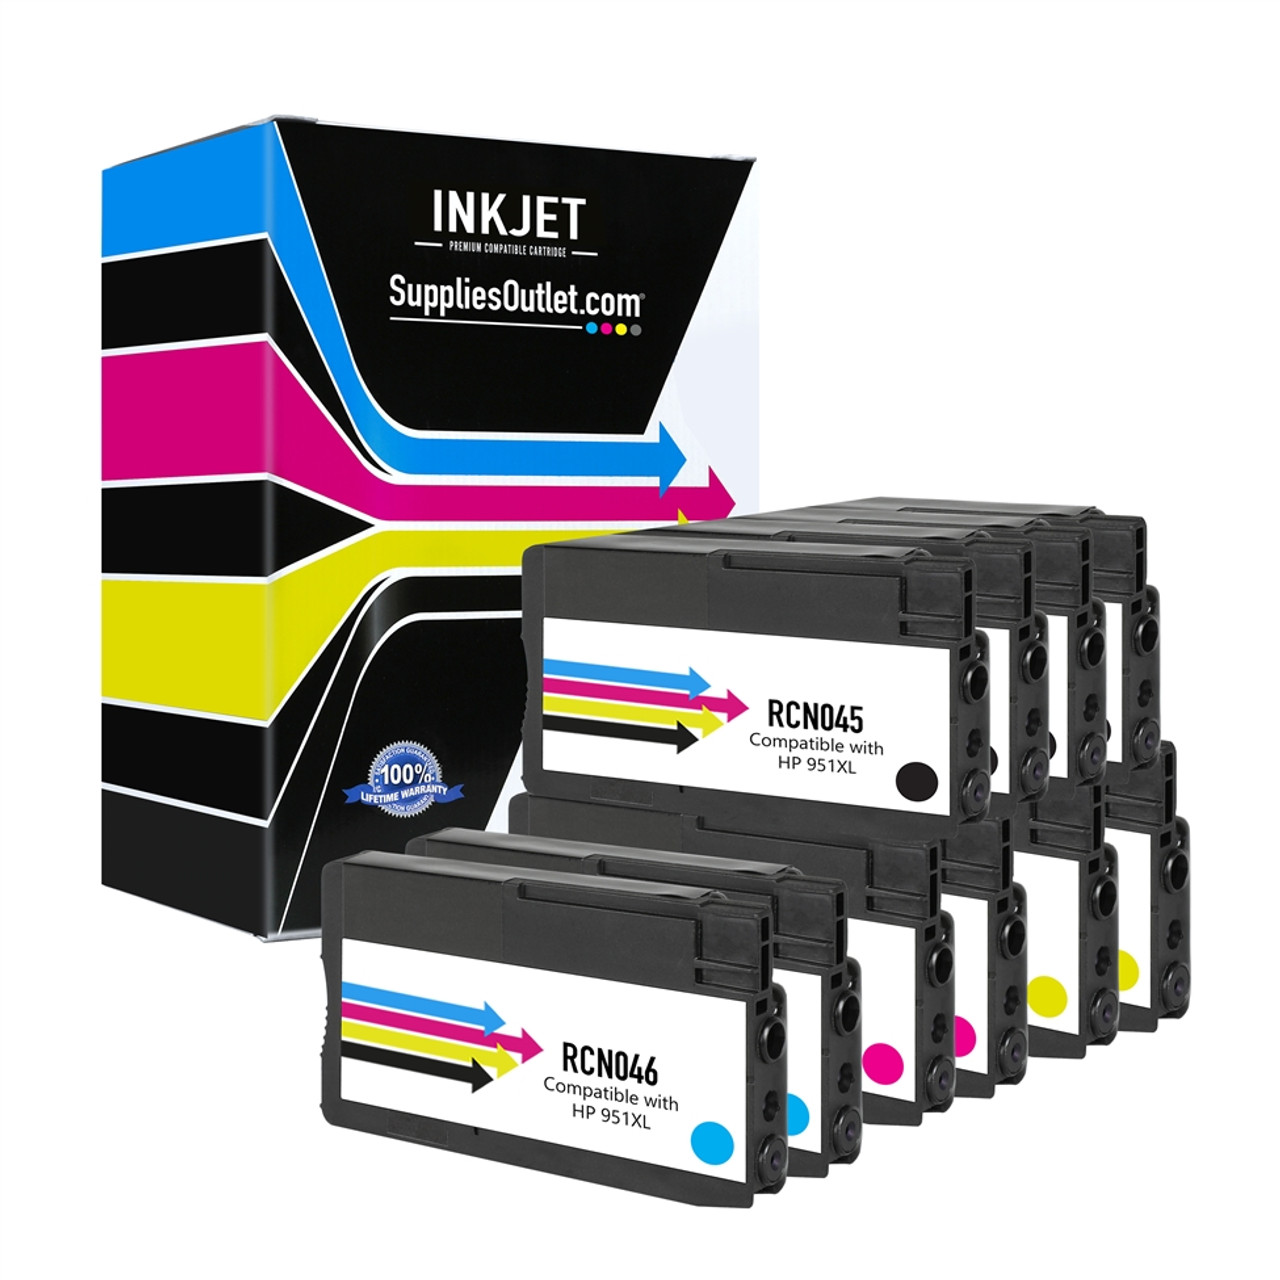 HP 950XL / 951XL Cartridge (All Colors) by SuppliesOutlet